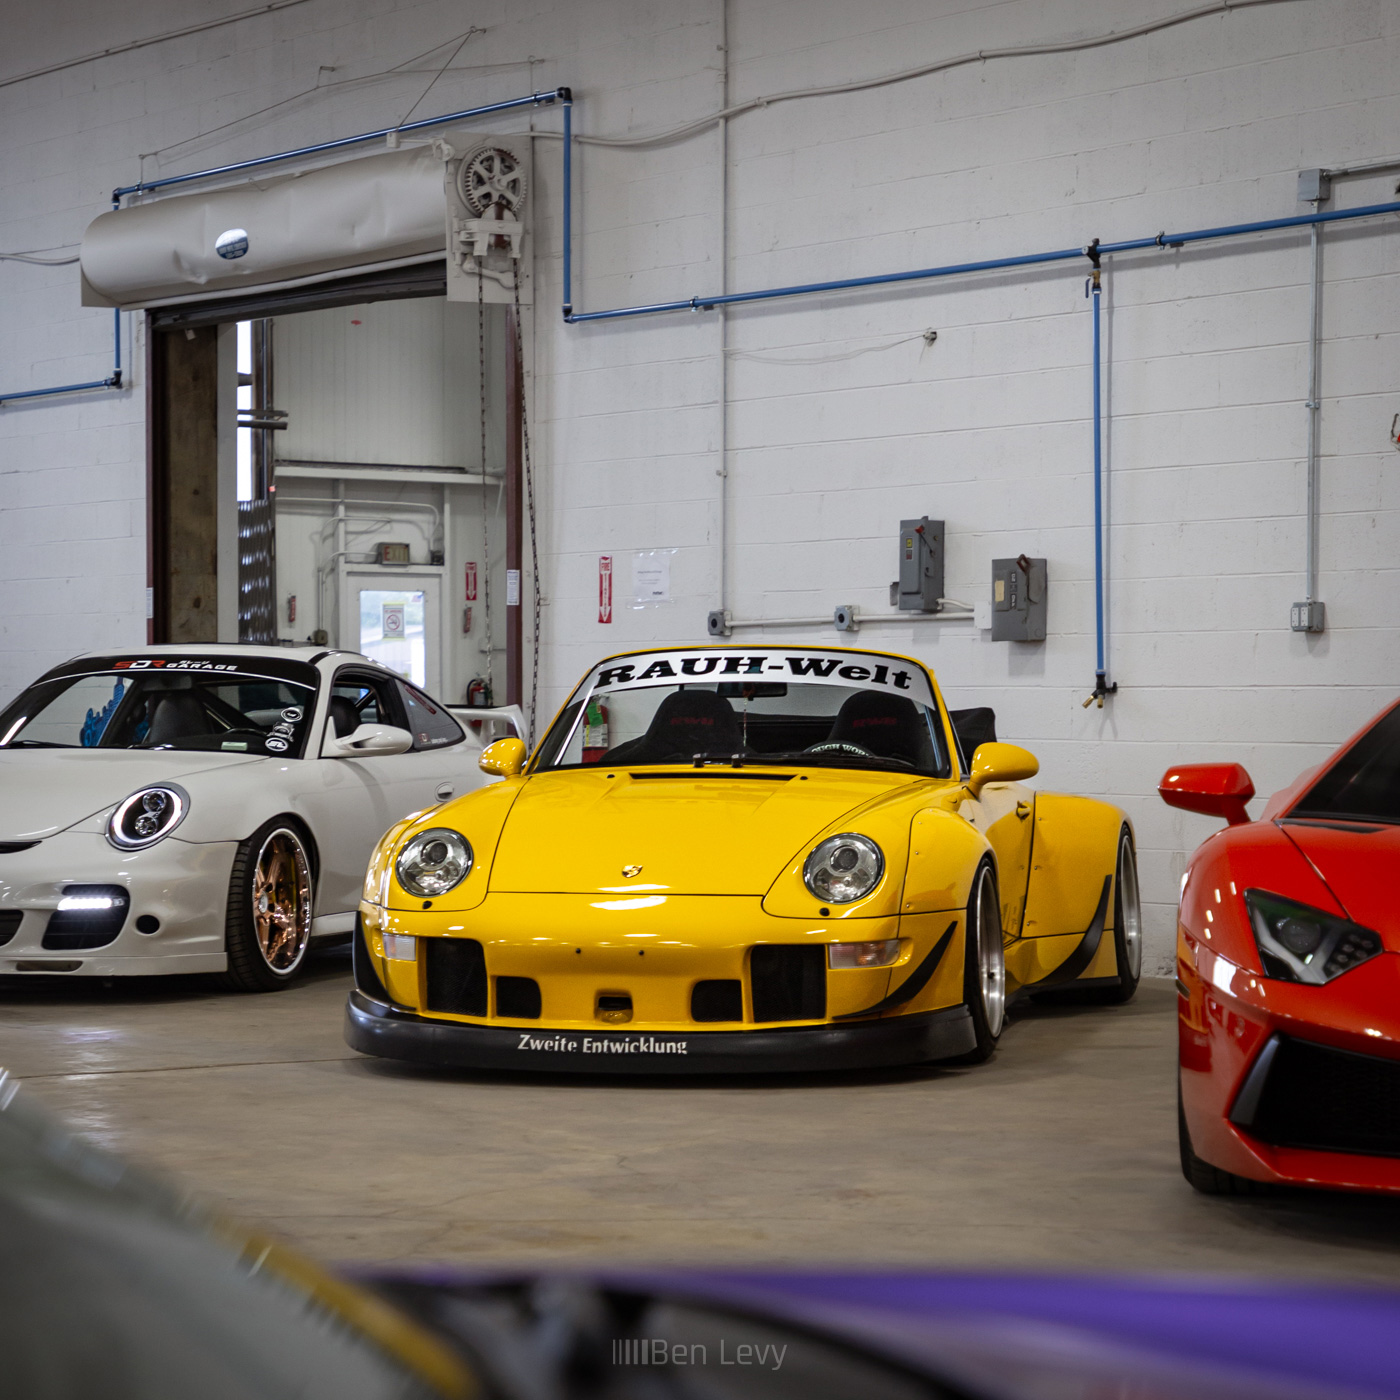 RAUH-Welt Porsche 911 at Chitown Exotics Supercars for Charity